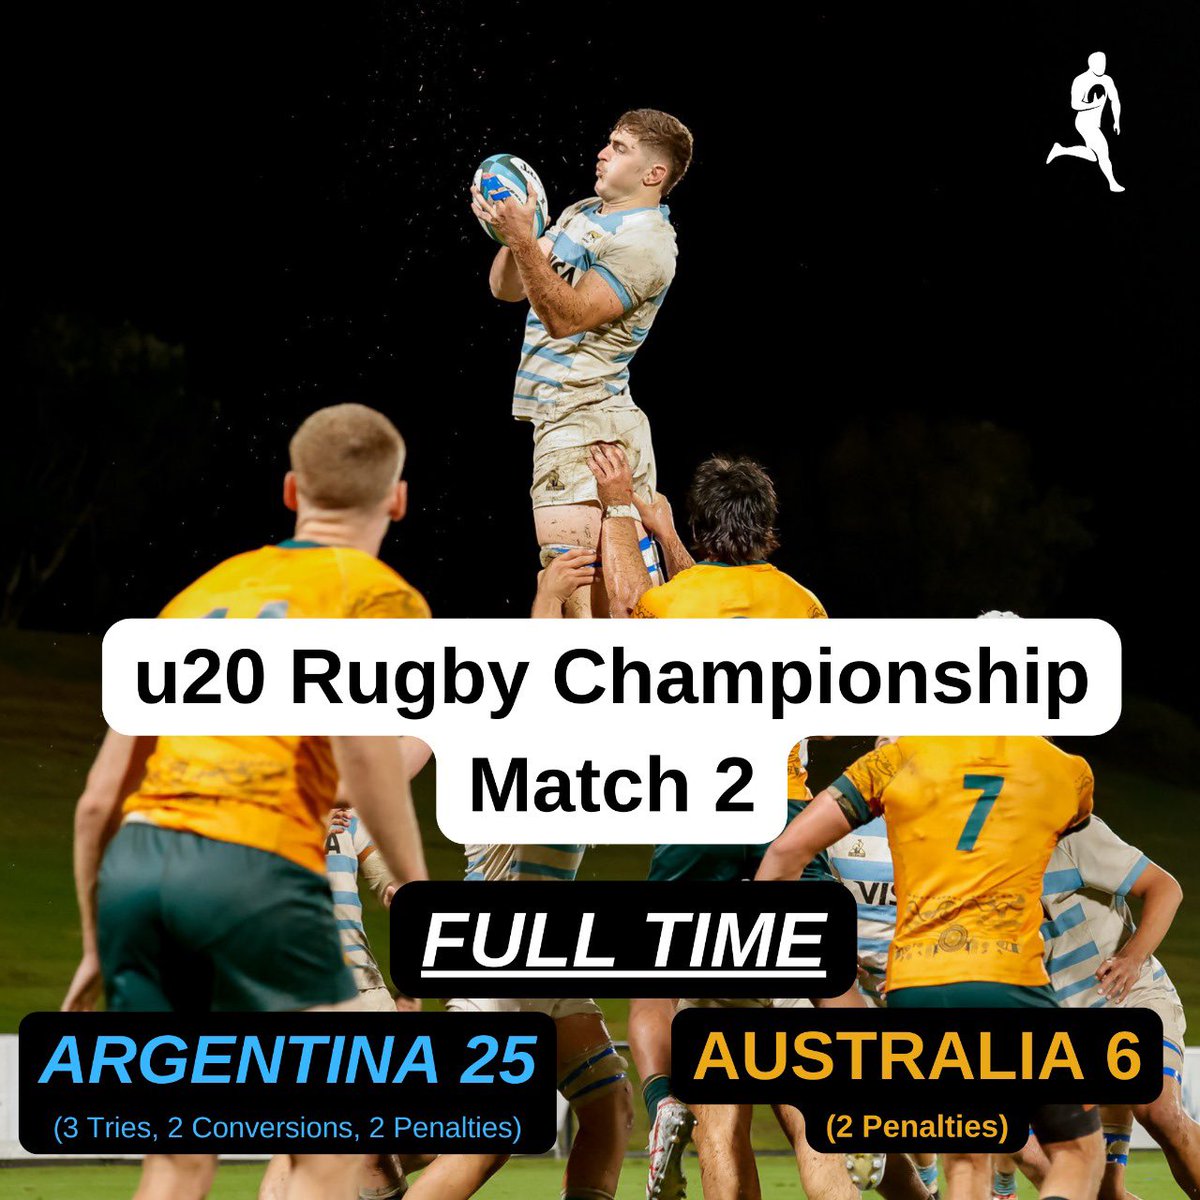 Argentina climb to the top of the u20 Rugby Championship log after a 25-6 win🐆🏆